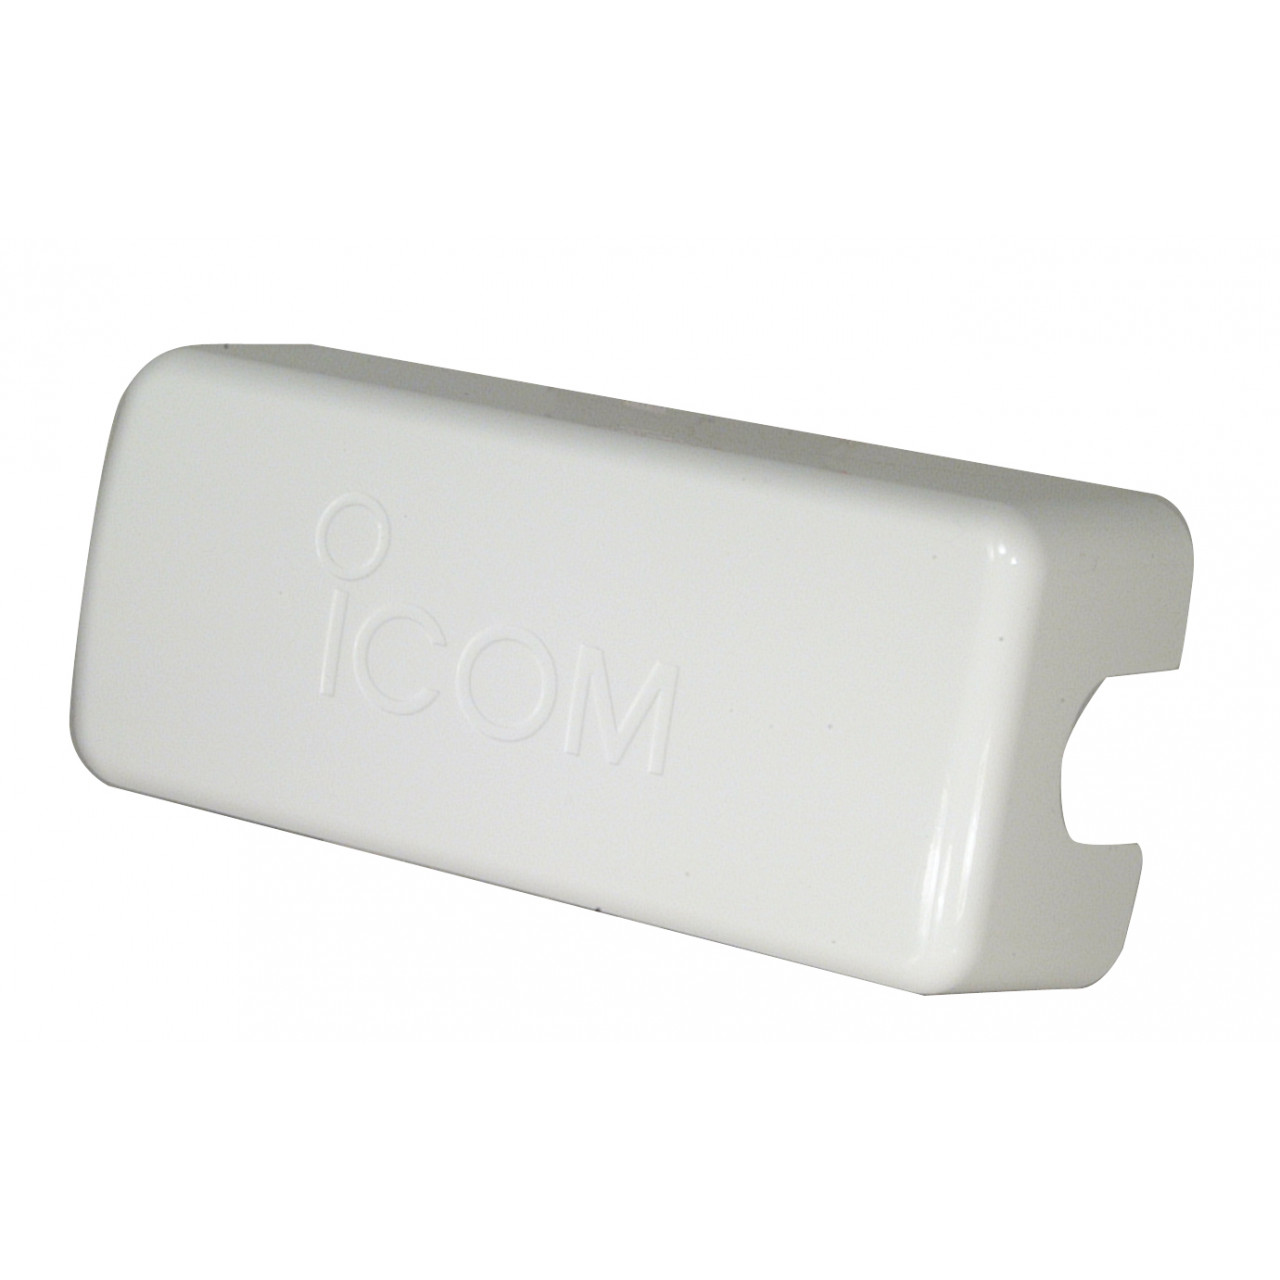 MB-92 Covers, fasteners and cradles - ICOM